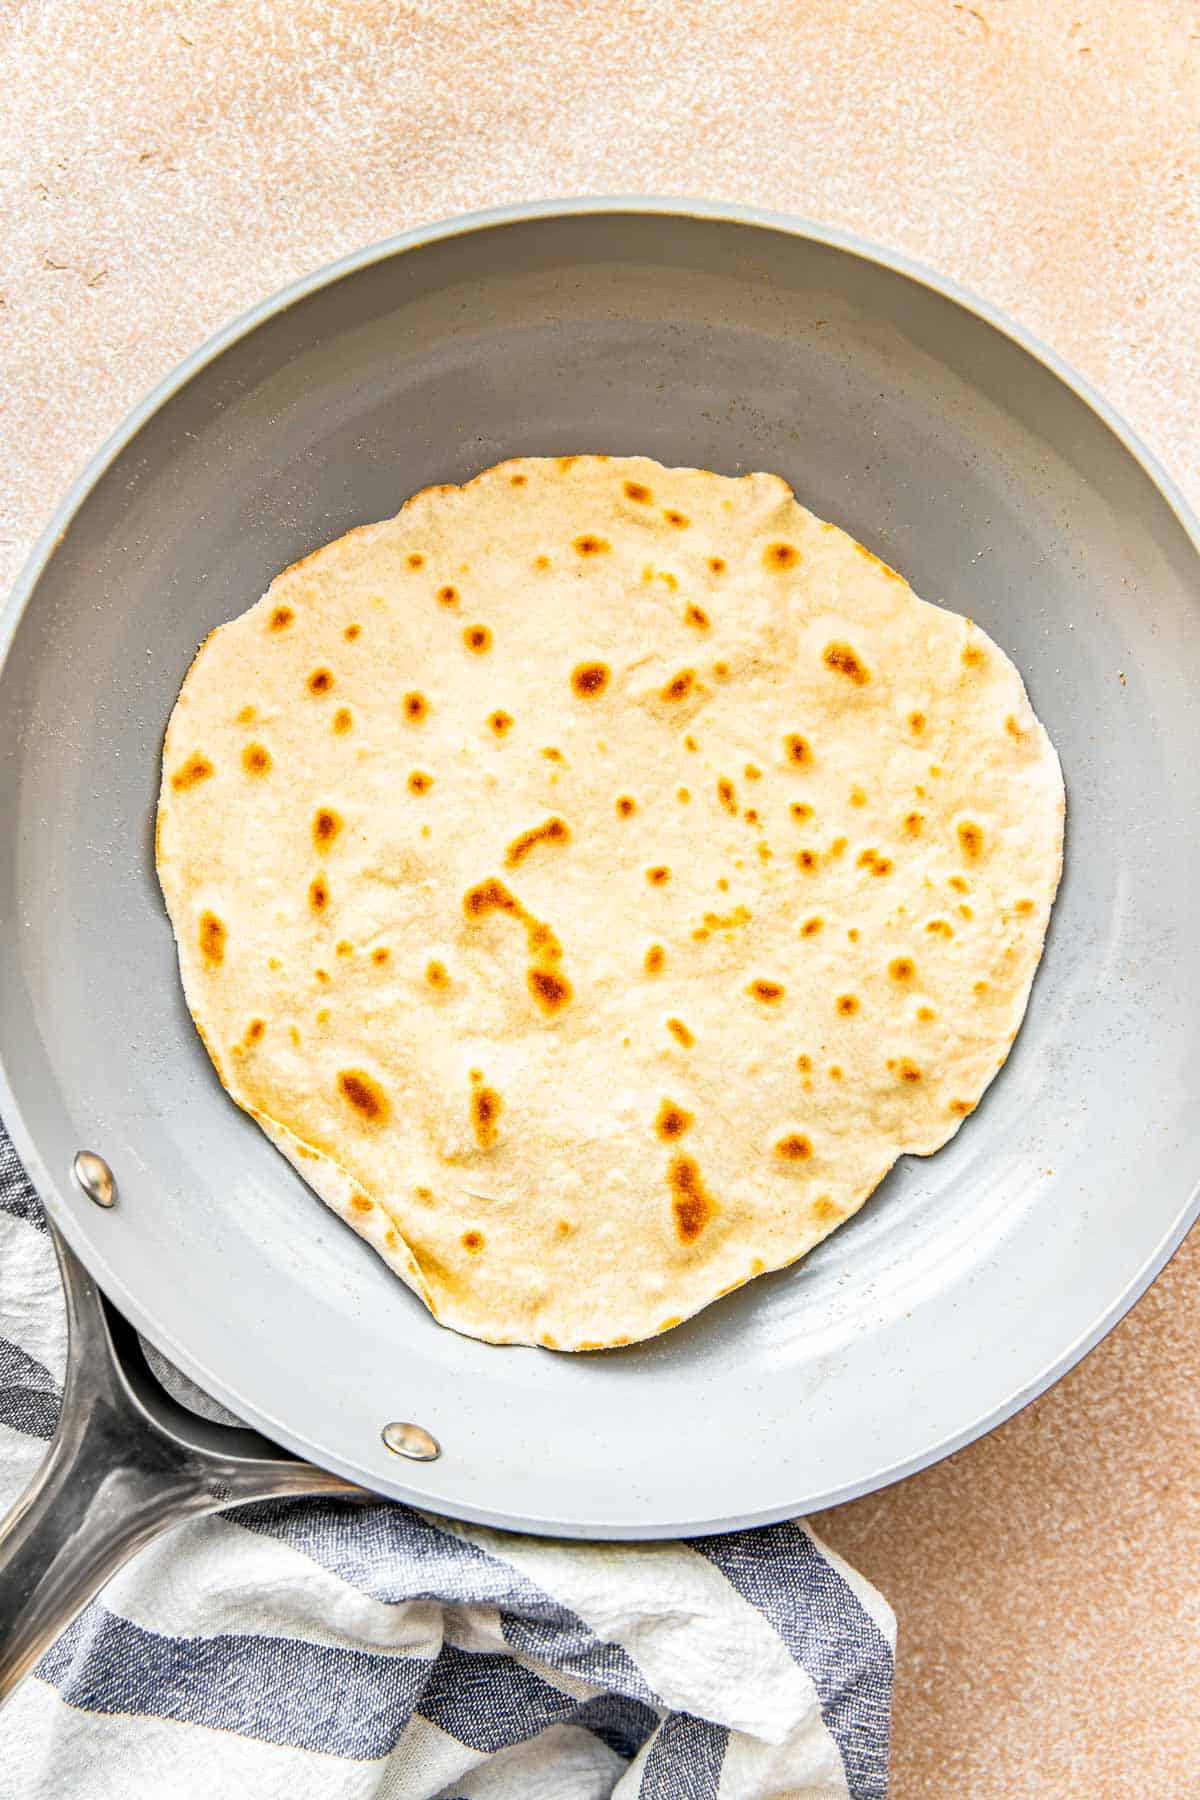 a flour tortilla with brown spots all over is in a nonstick skillet